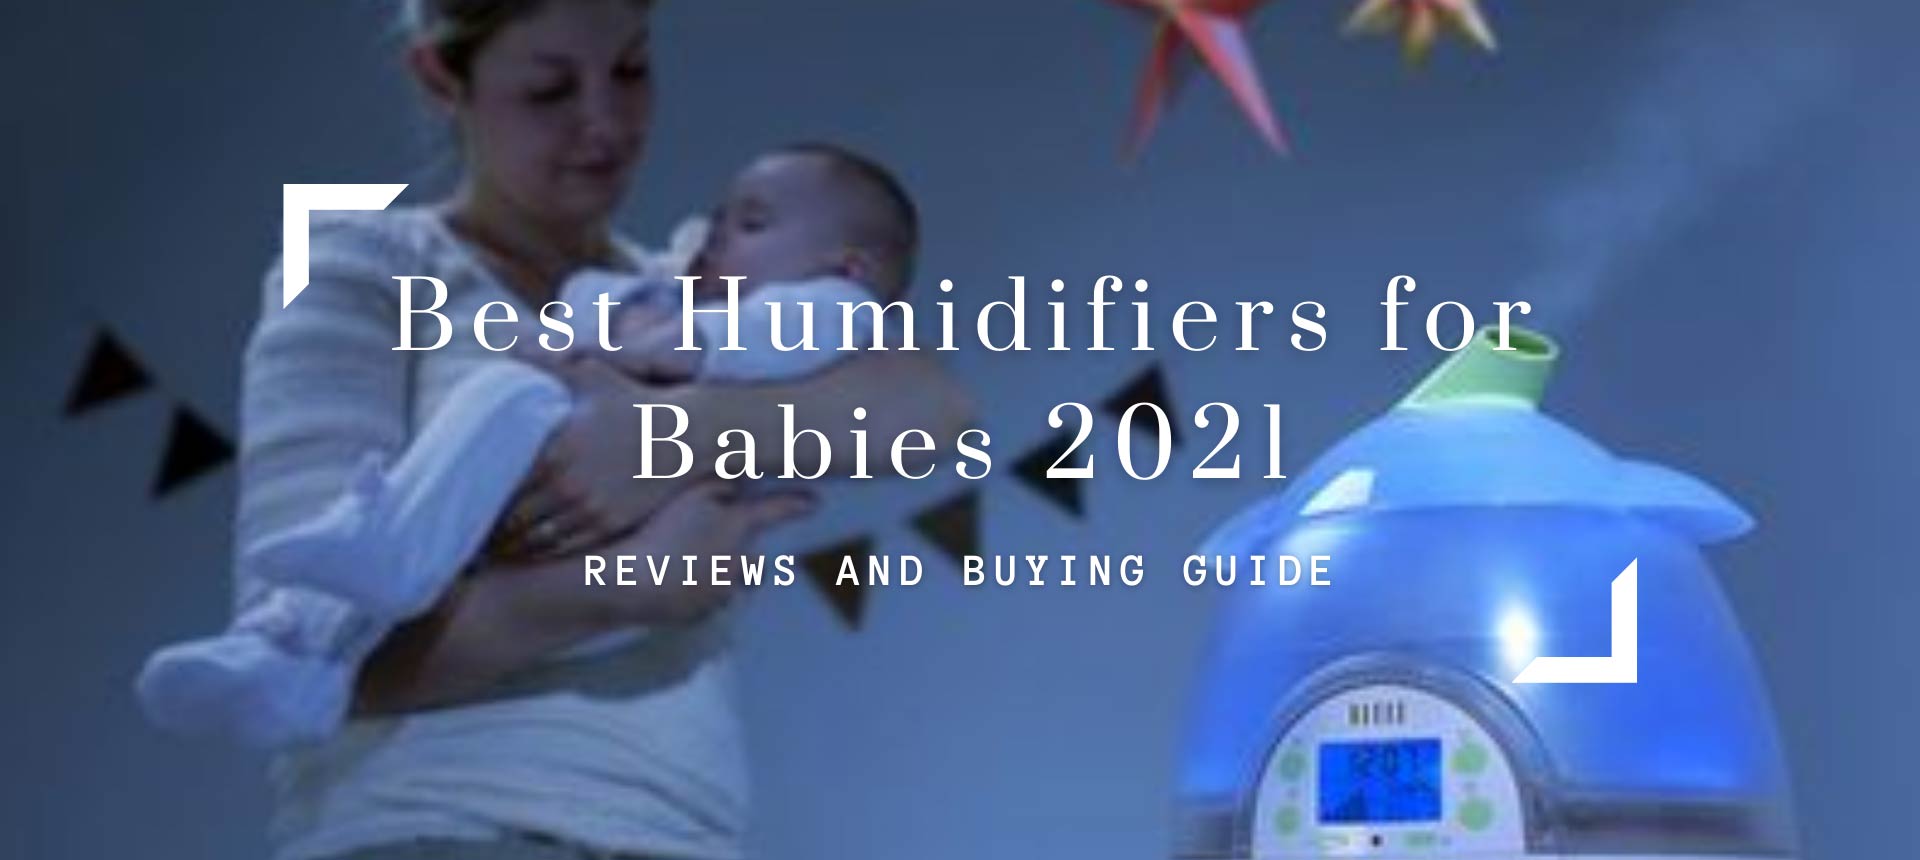 Best Humidifiers for Babies 2021